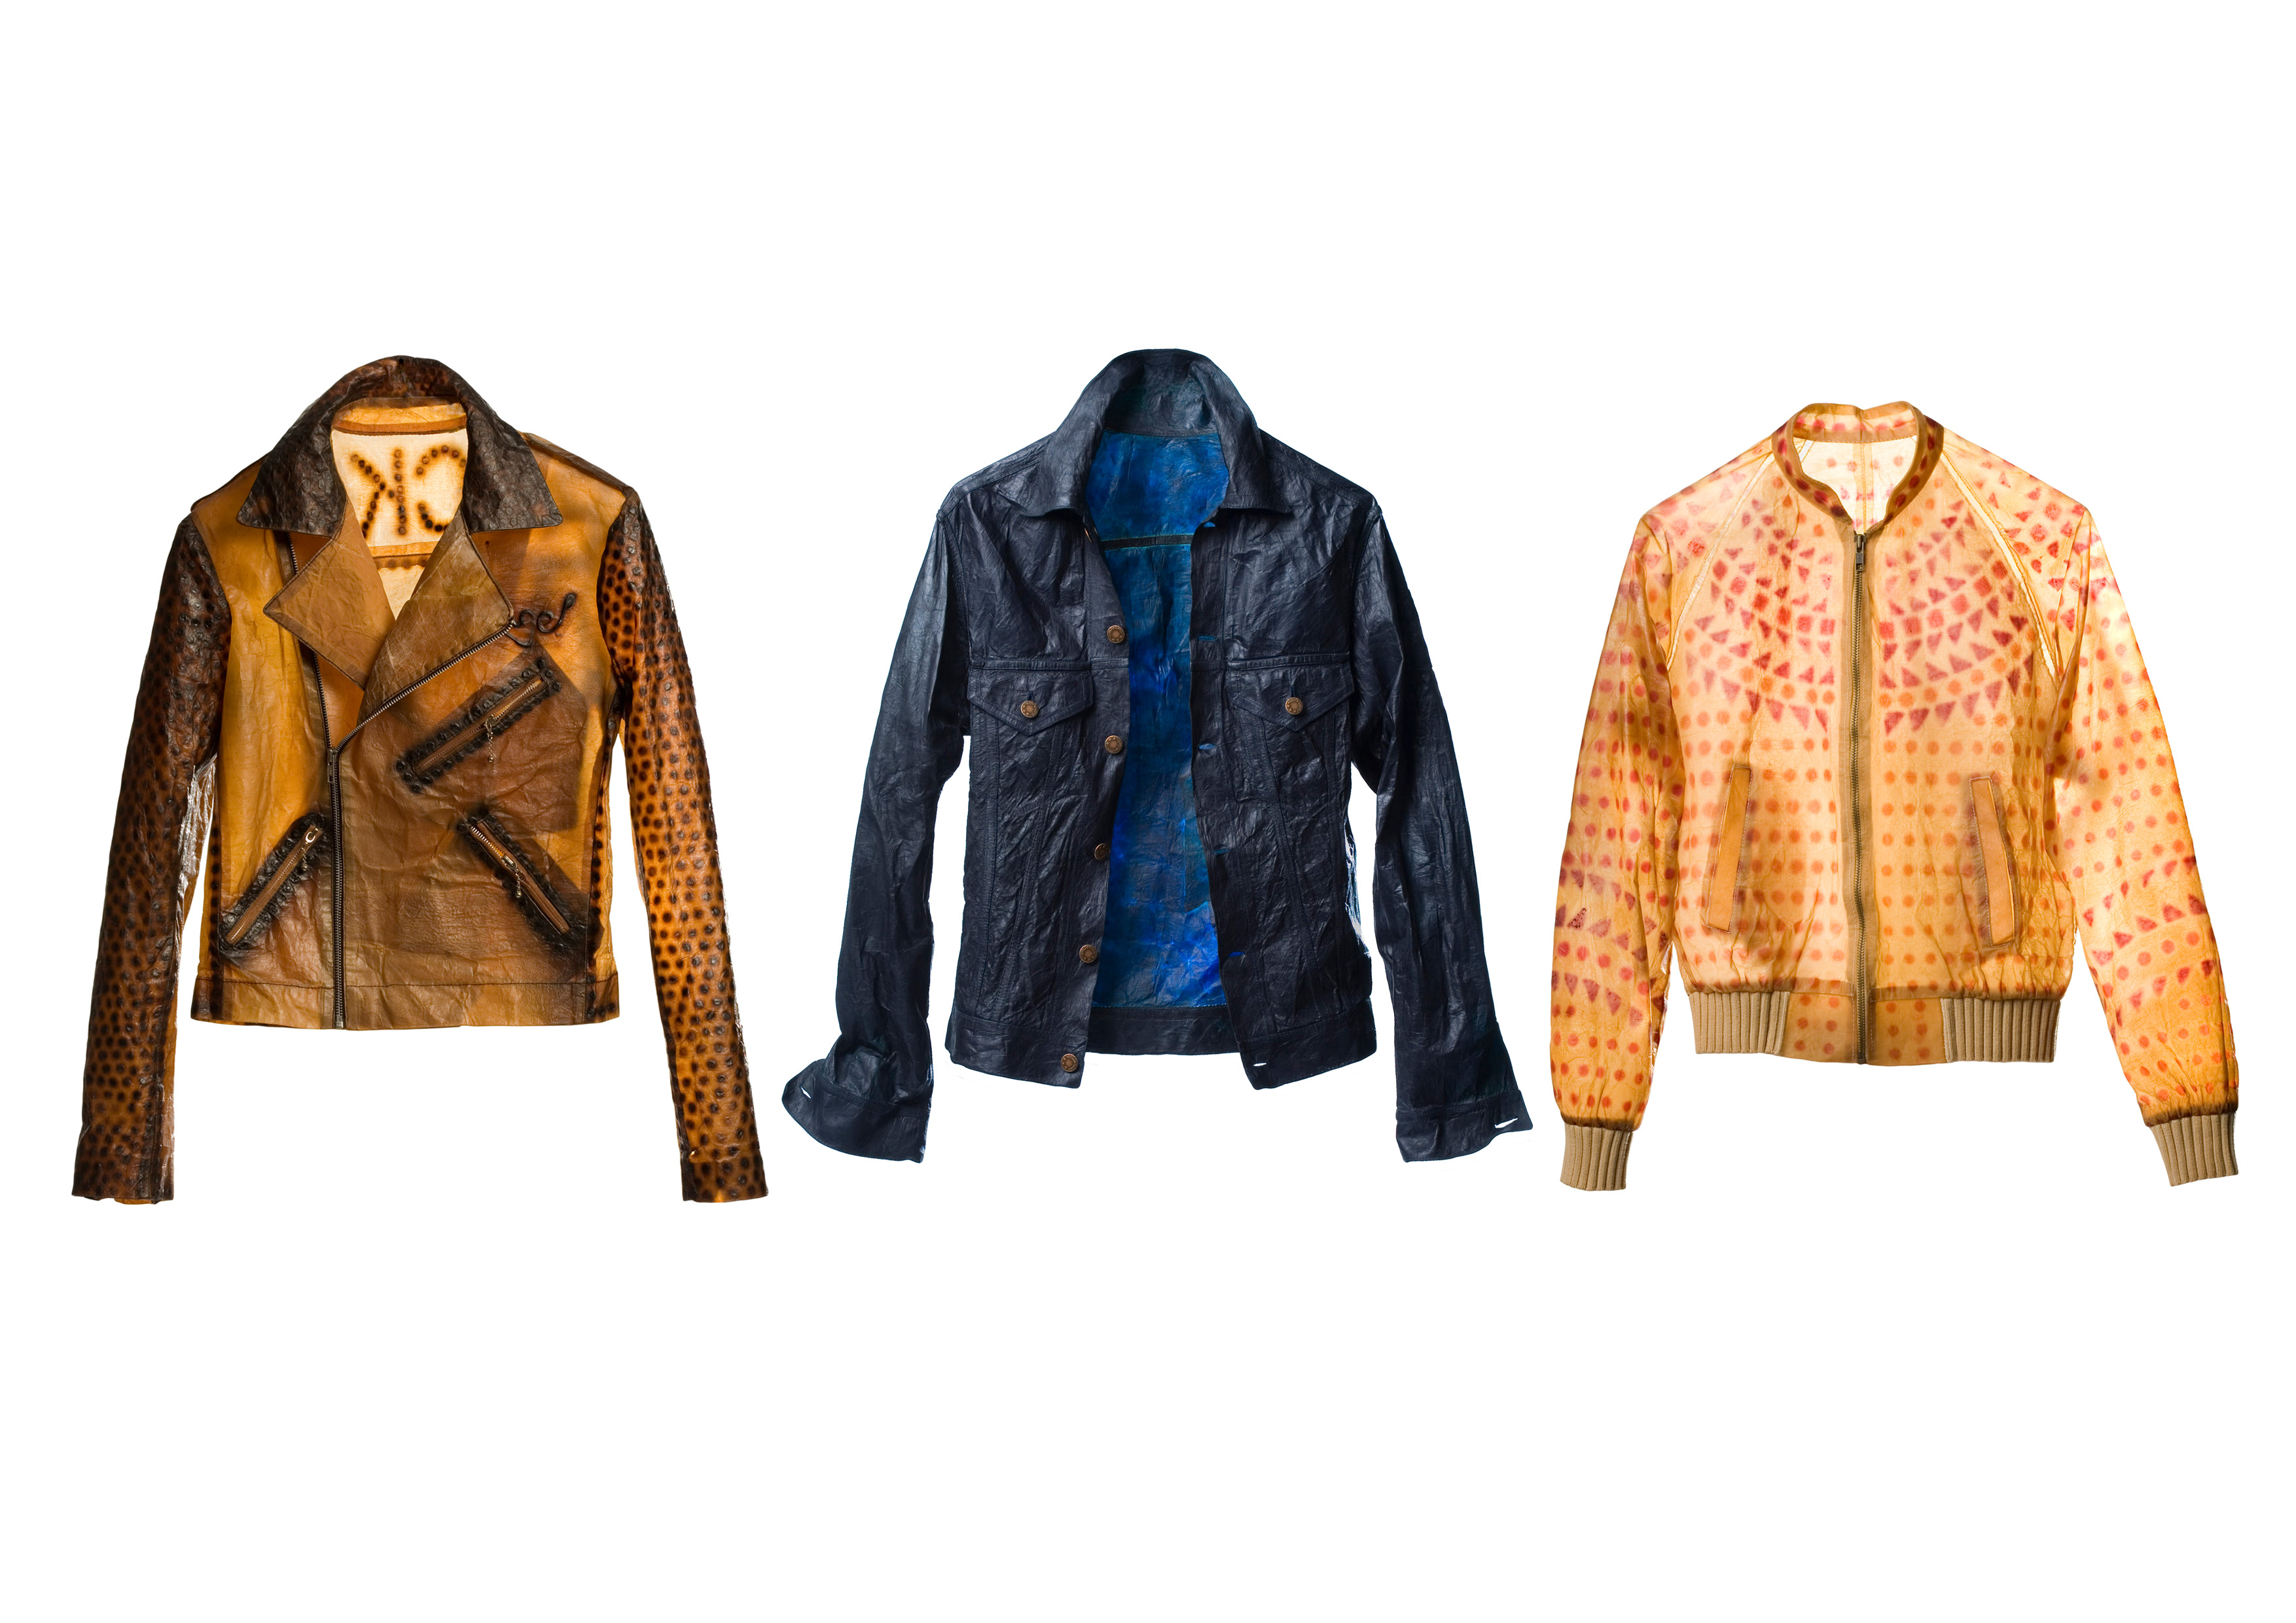 Biocouture jackets made of cellulose material